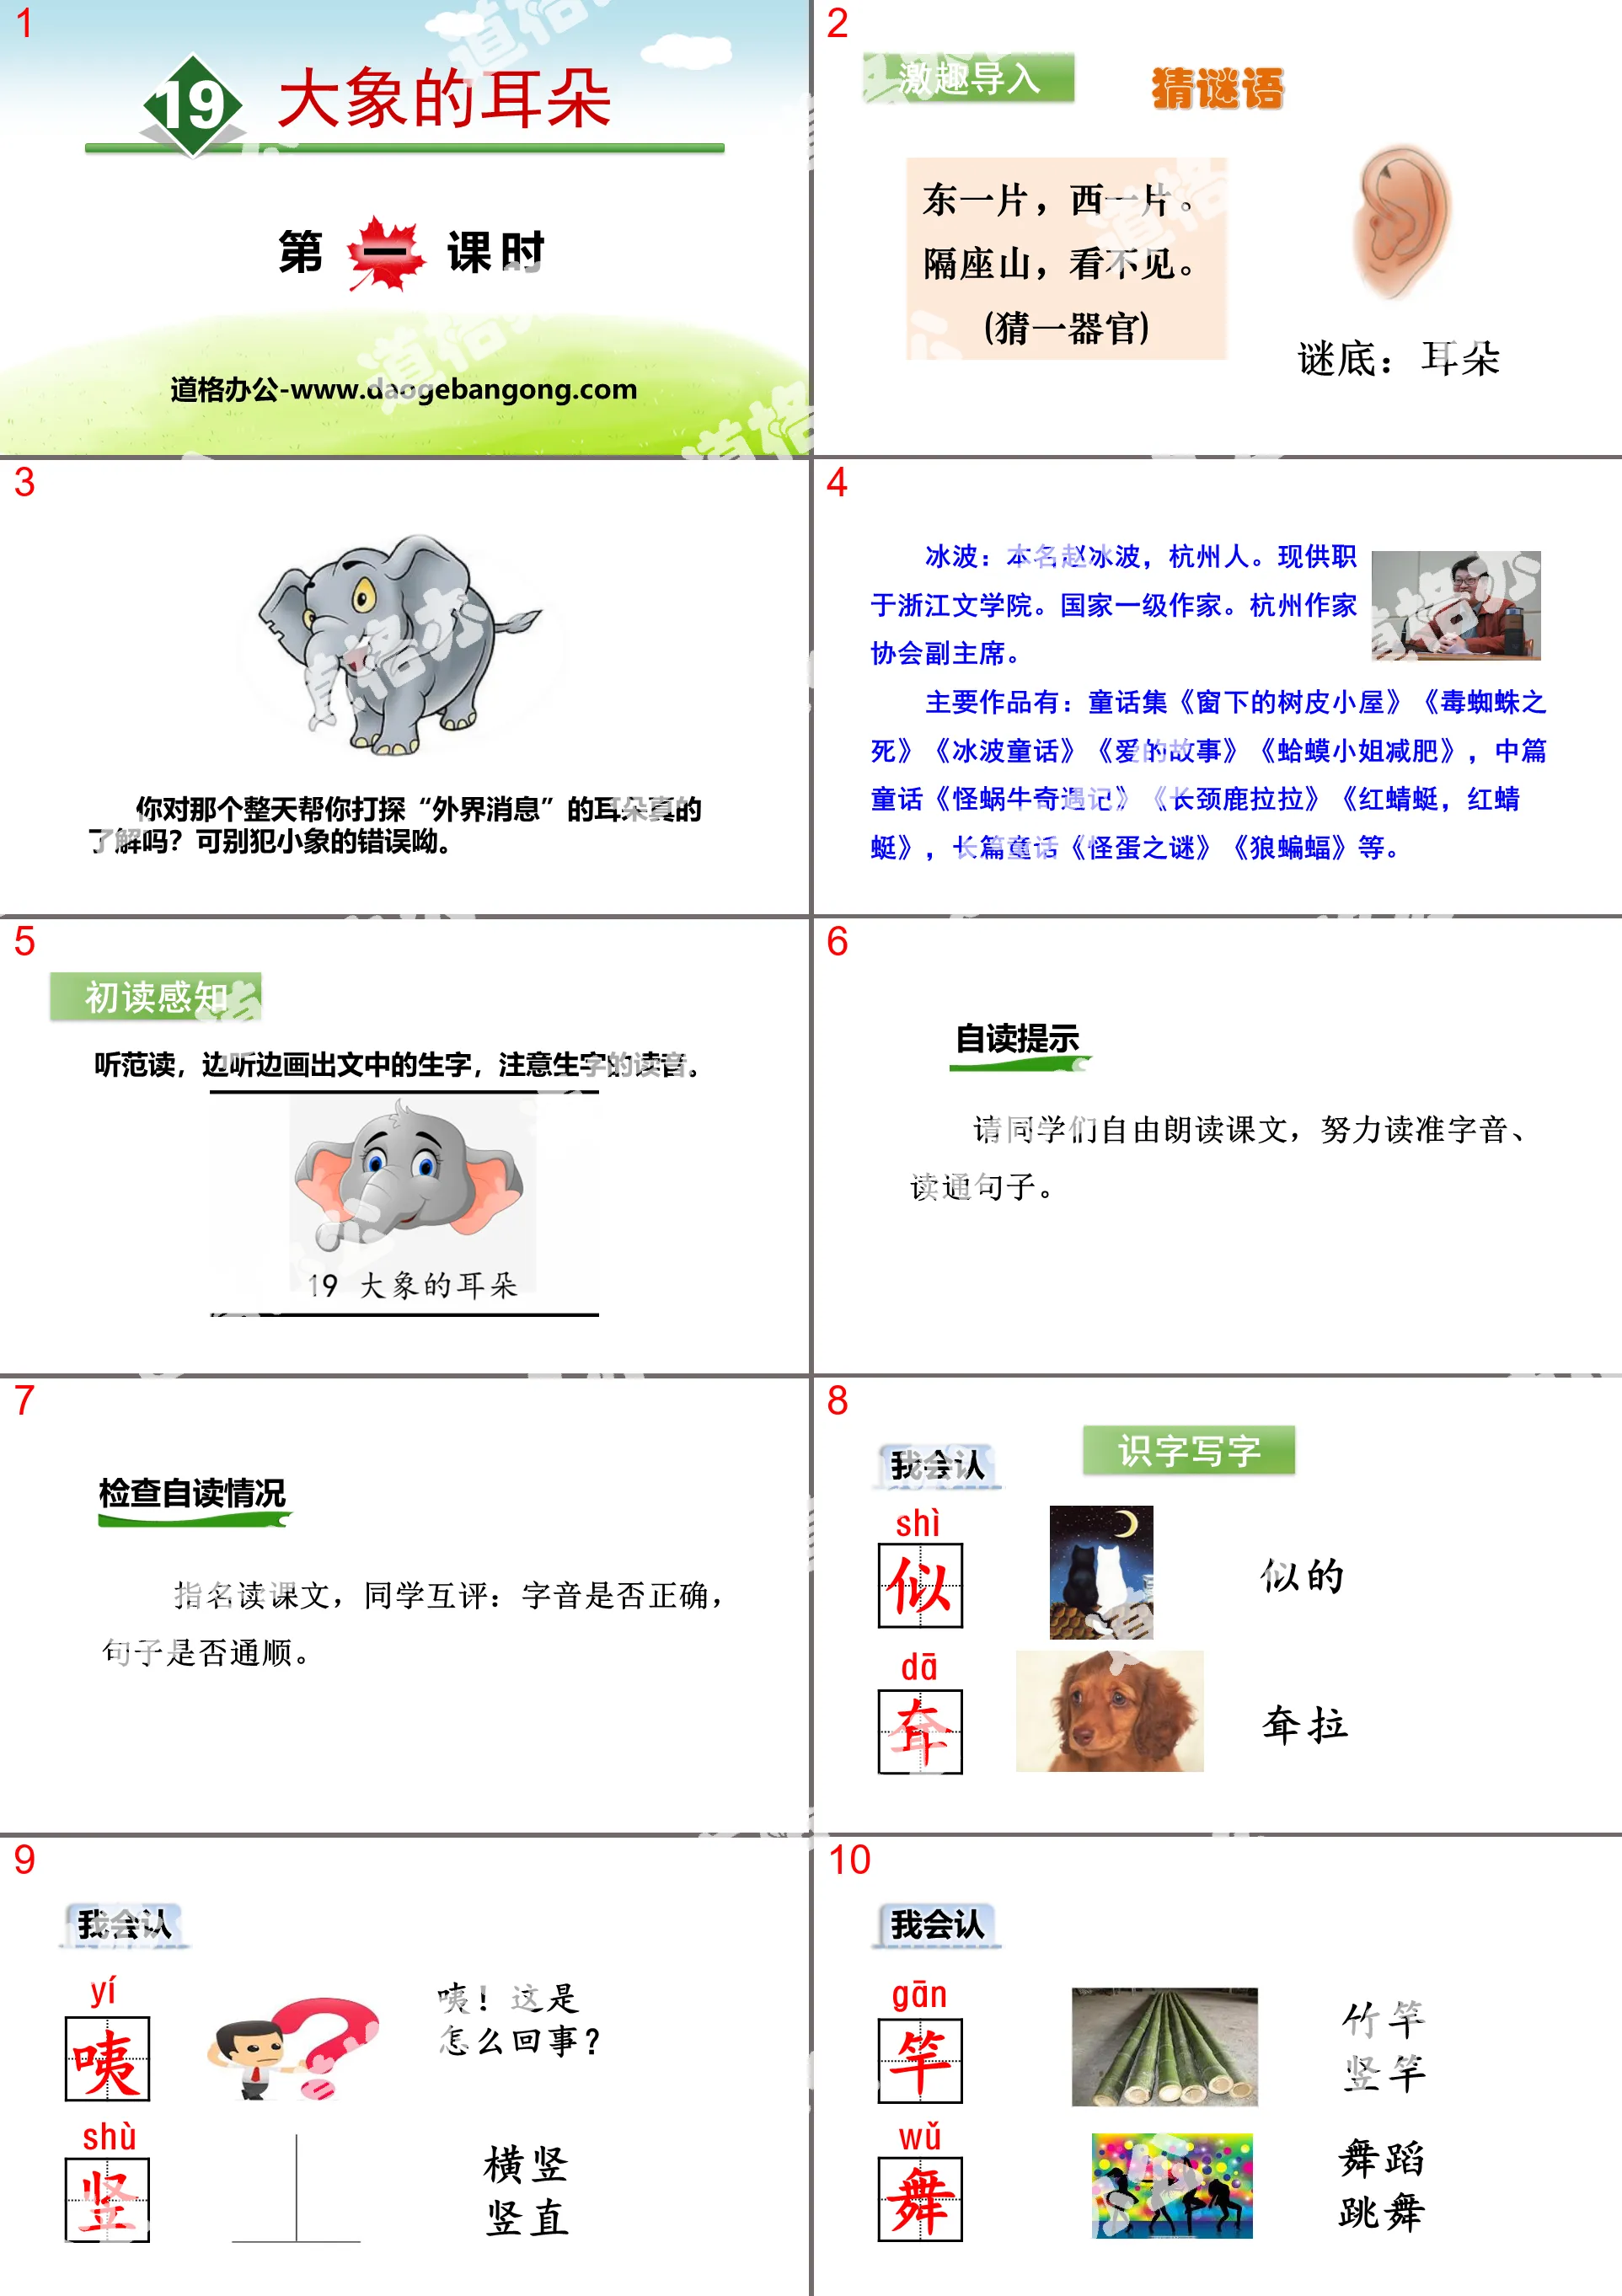 "Elephant's Ears" PPT download (first lesson)